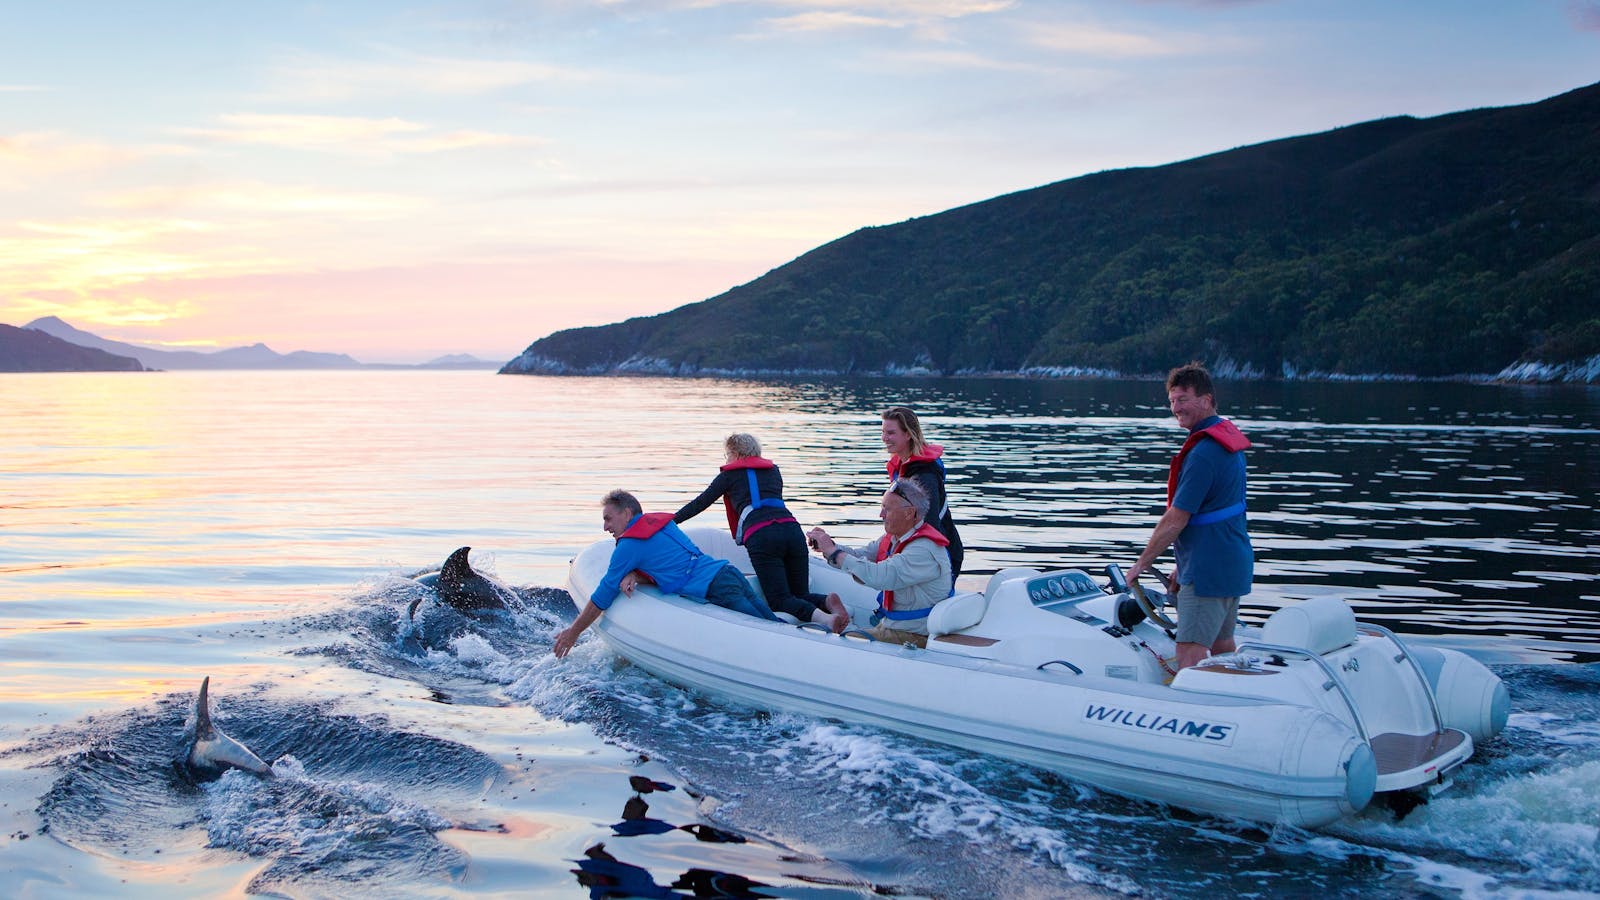 Guests in our tender are joined by dolphins at sunset